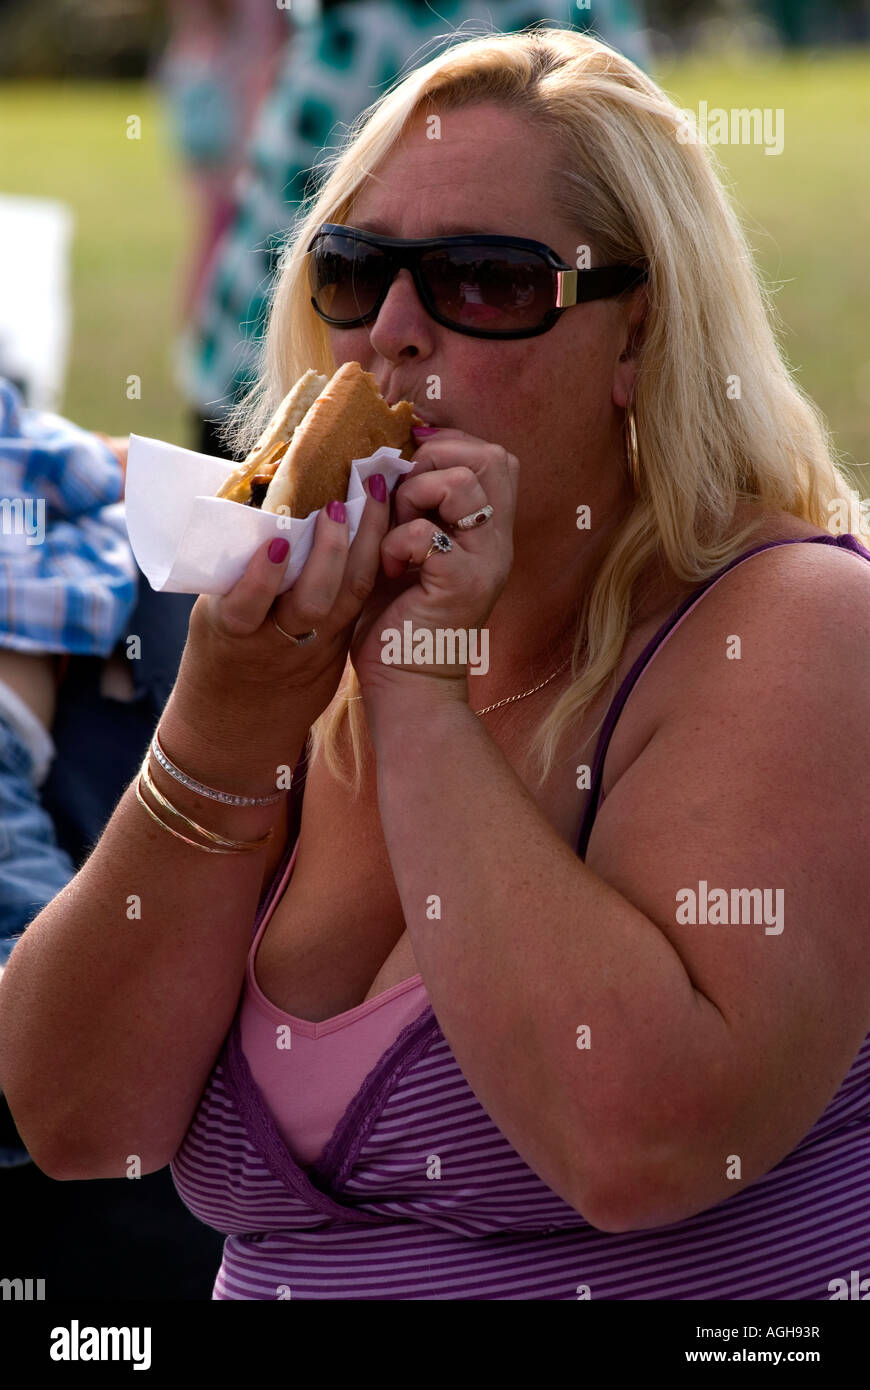 42 year old woman eating a hot dog at a community fun day in Heston, Middlesex, UK. Stock Photo